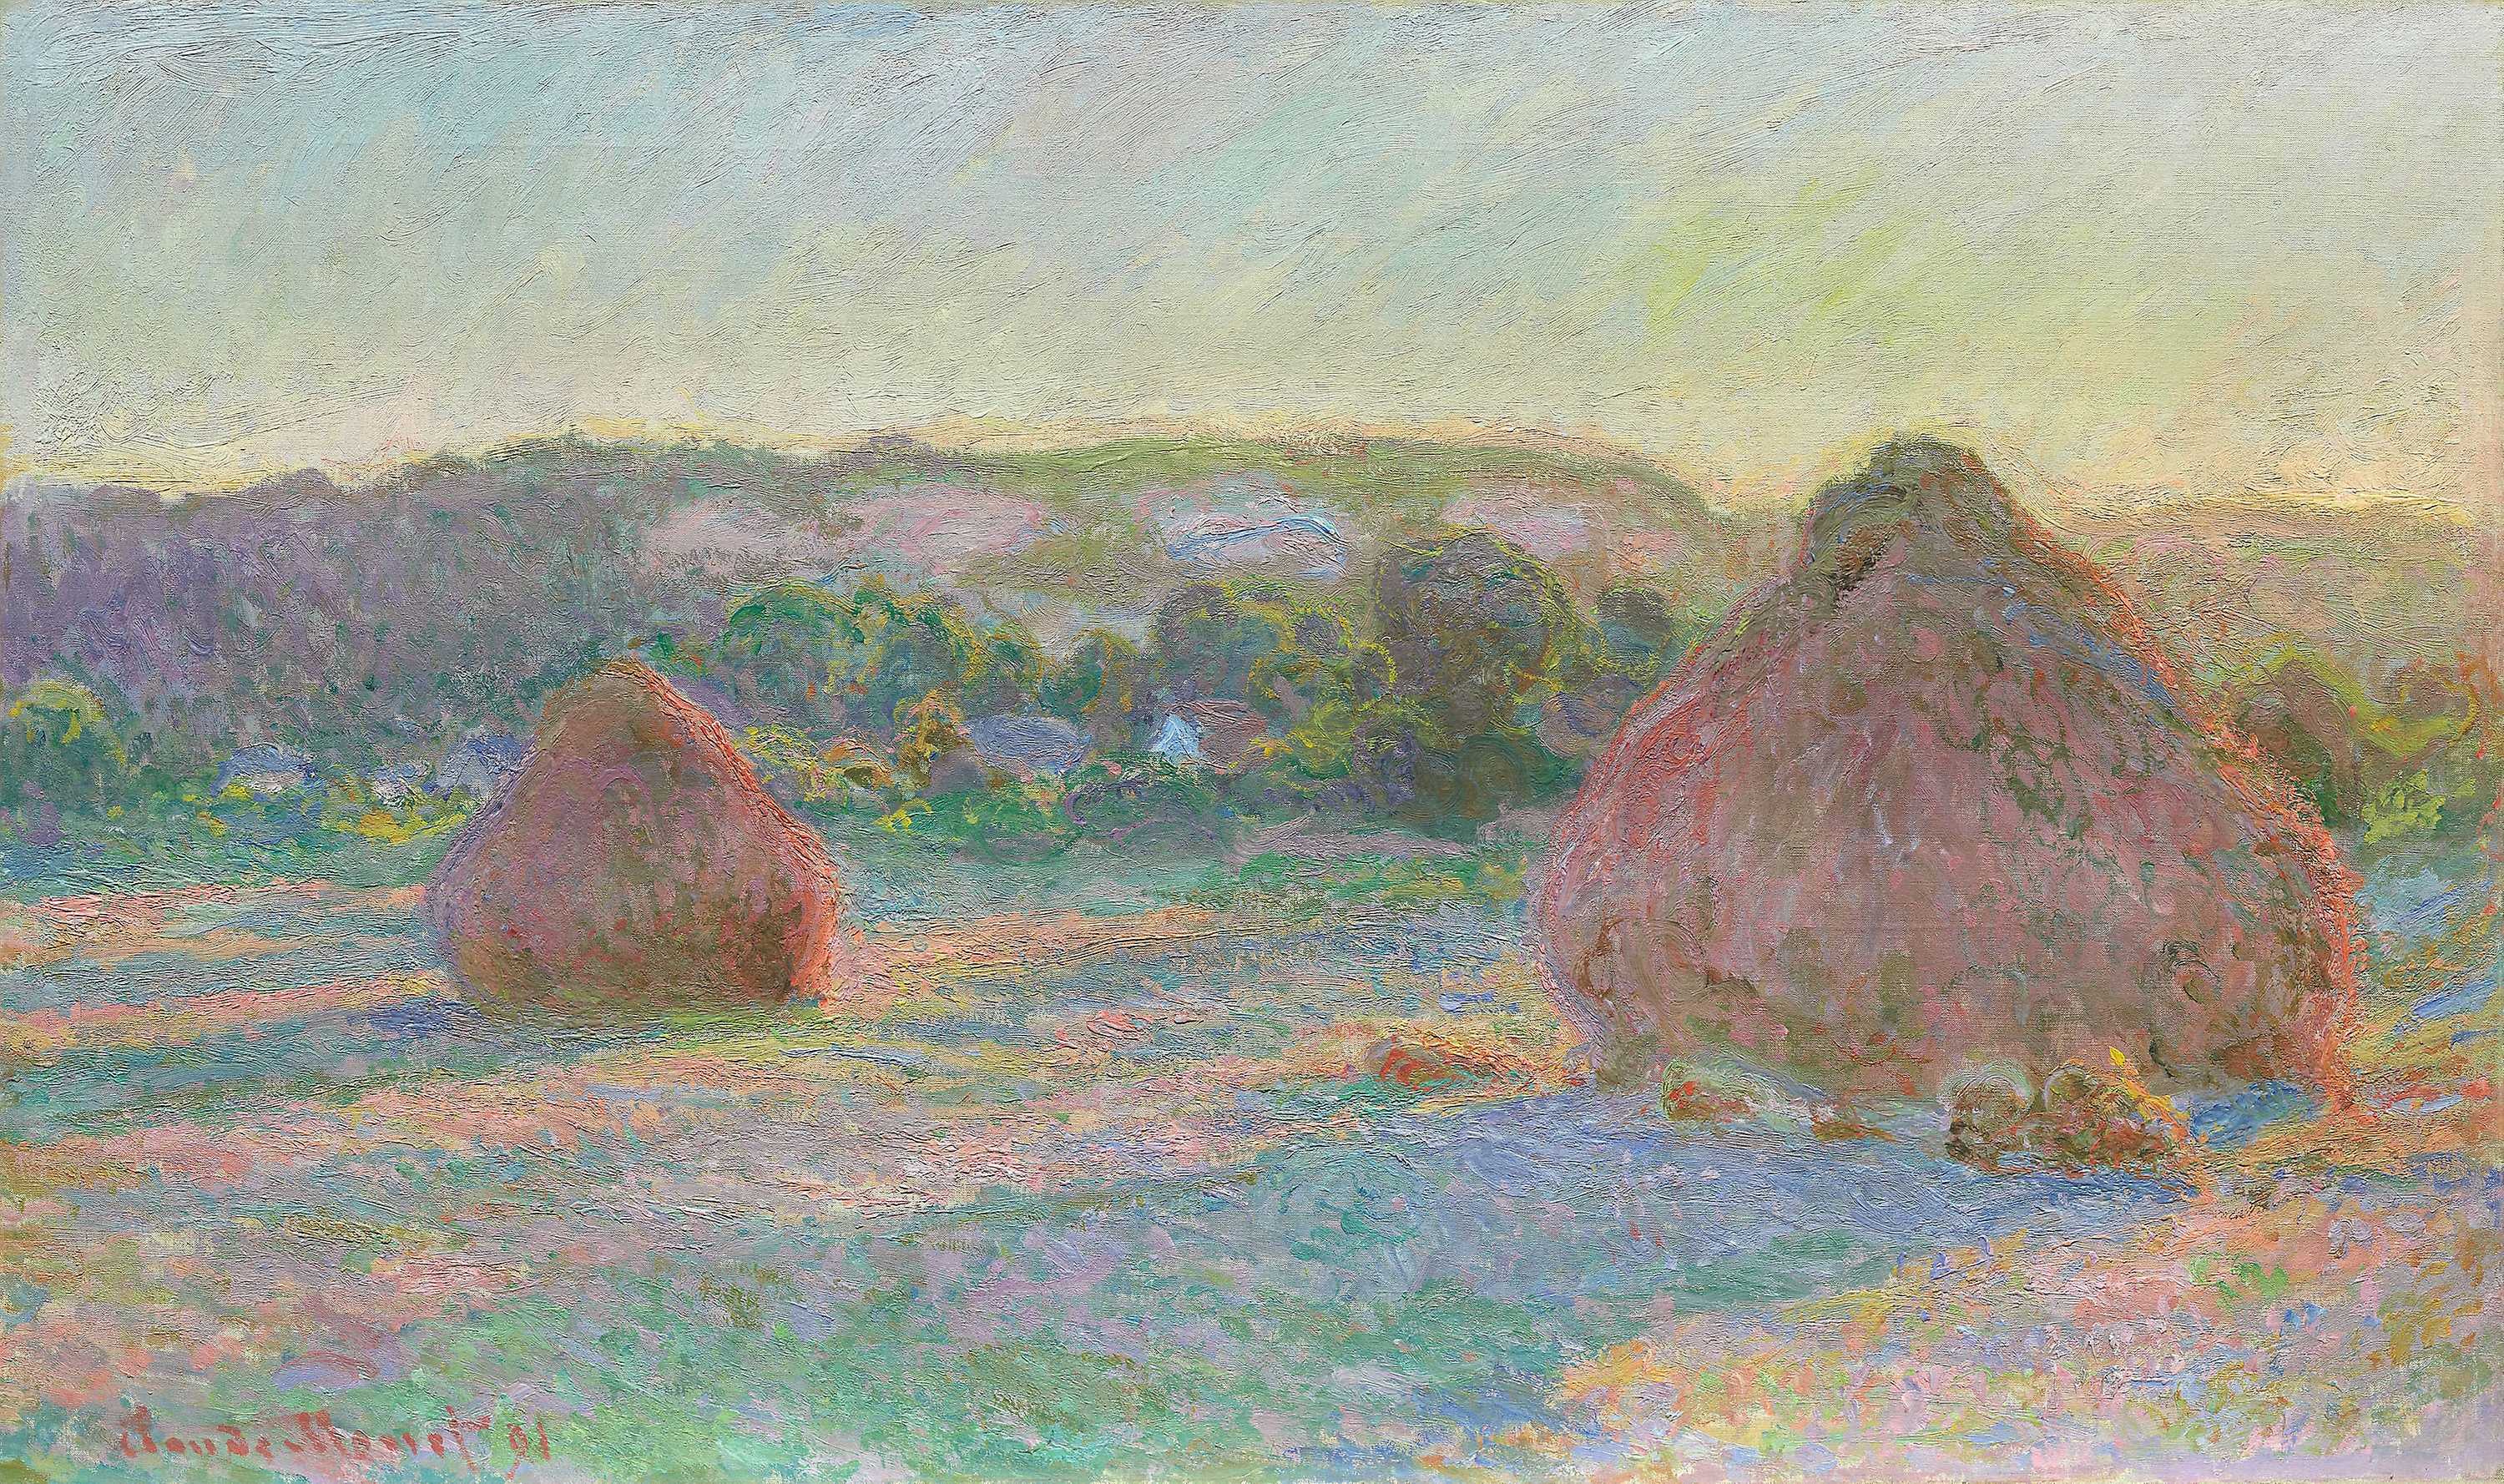 Stacks of Wheat (End of Summer) by Claude Monet - 1891 - 60 x 100.5 cm Art Institute of Chicago